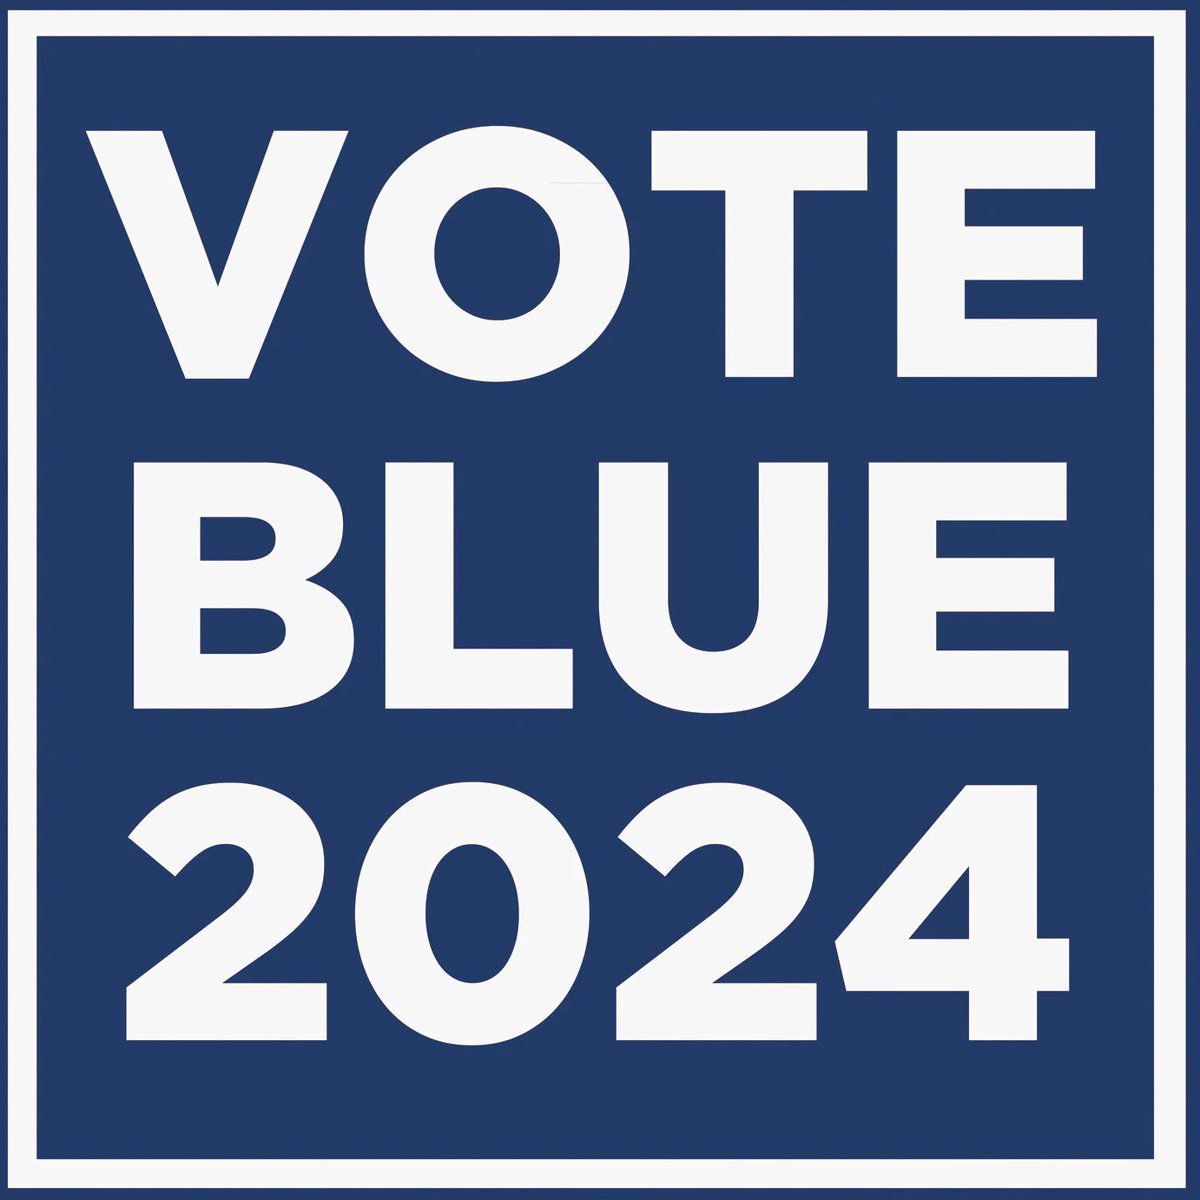 Drop a 💙 if you want to meet more Friends Like and Repost We’re Stronger Together💯 Vote Blue 2024